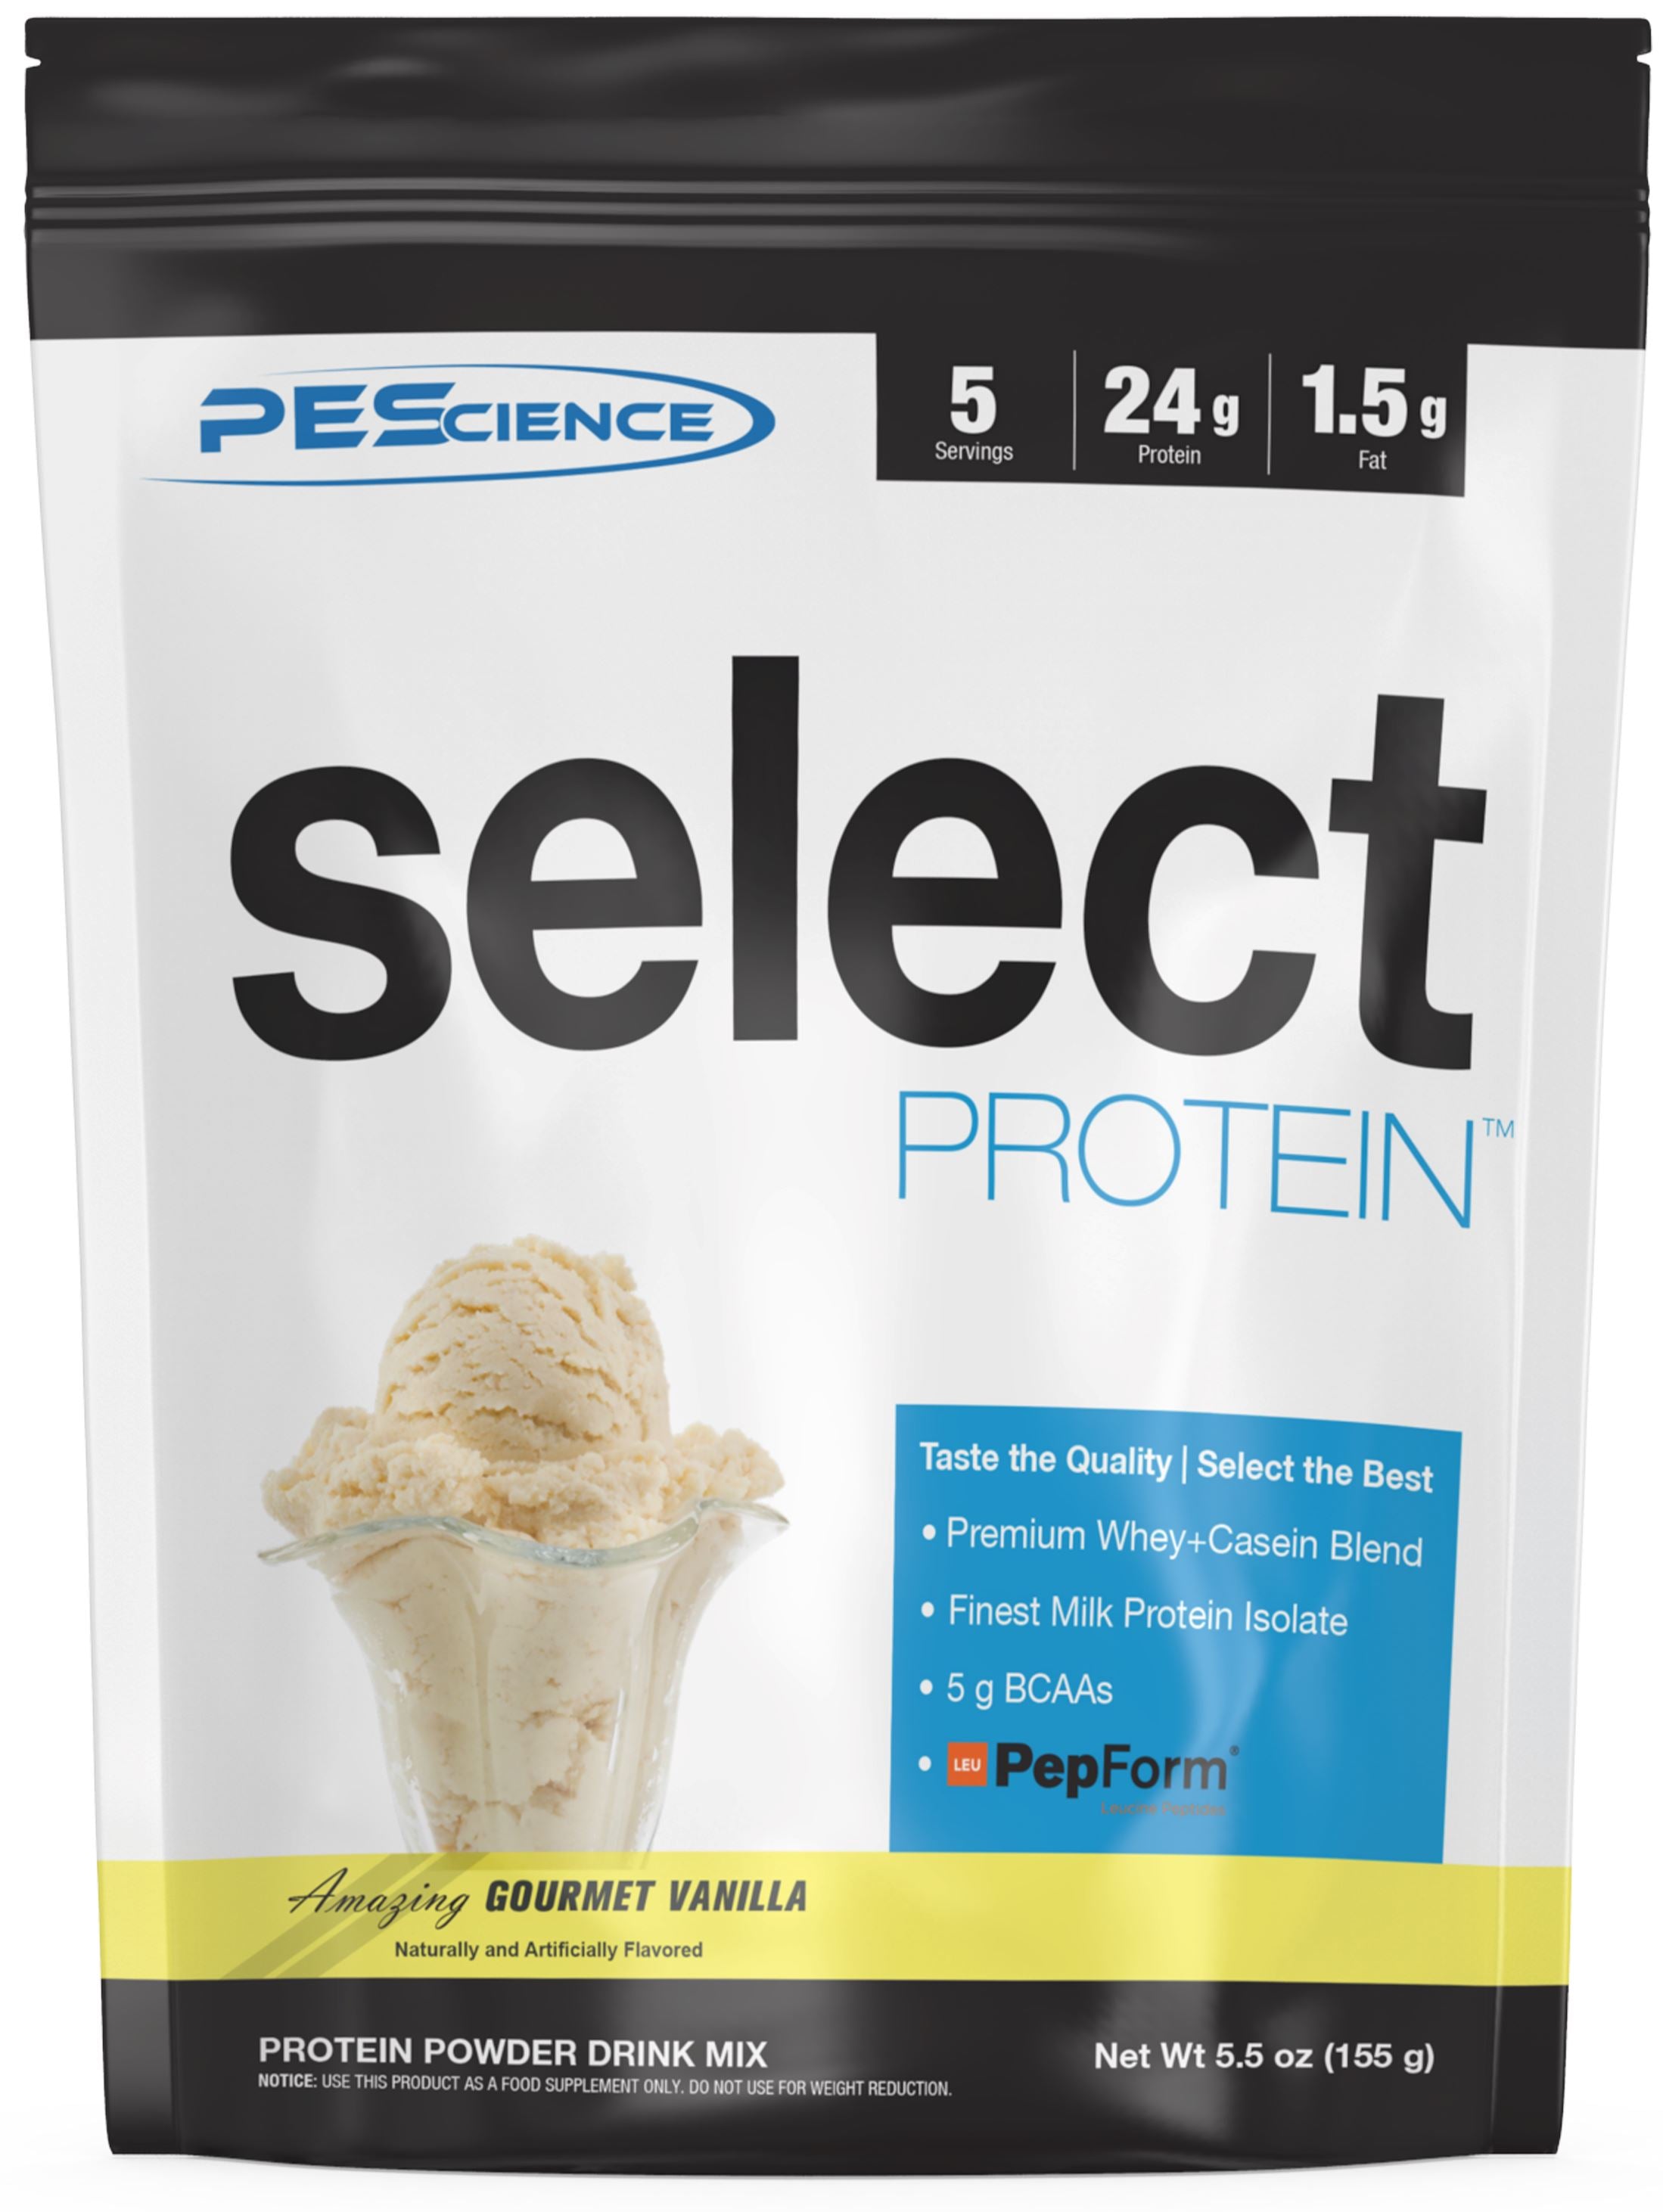 Select Whey & Casein Protein Blend Isolate - Peanut Butter Cup (27